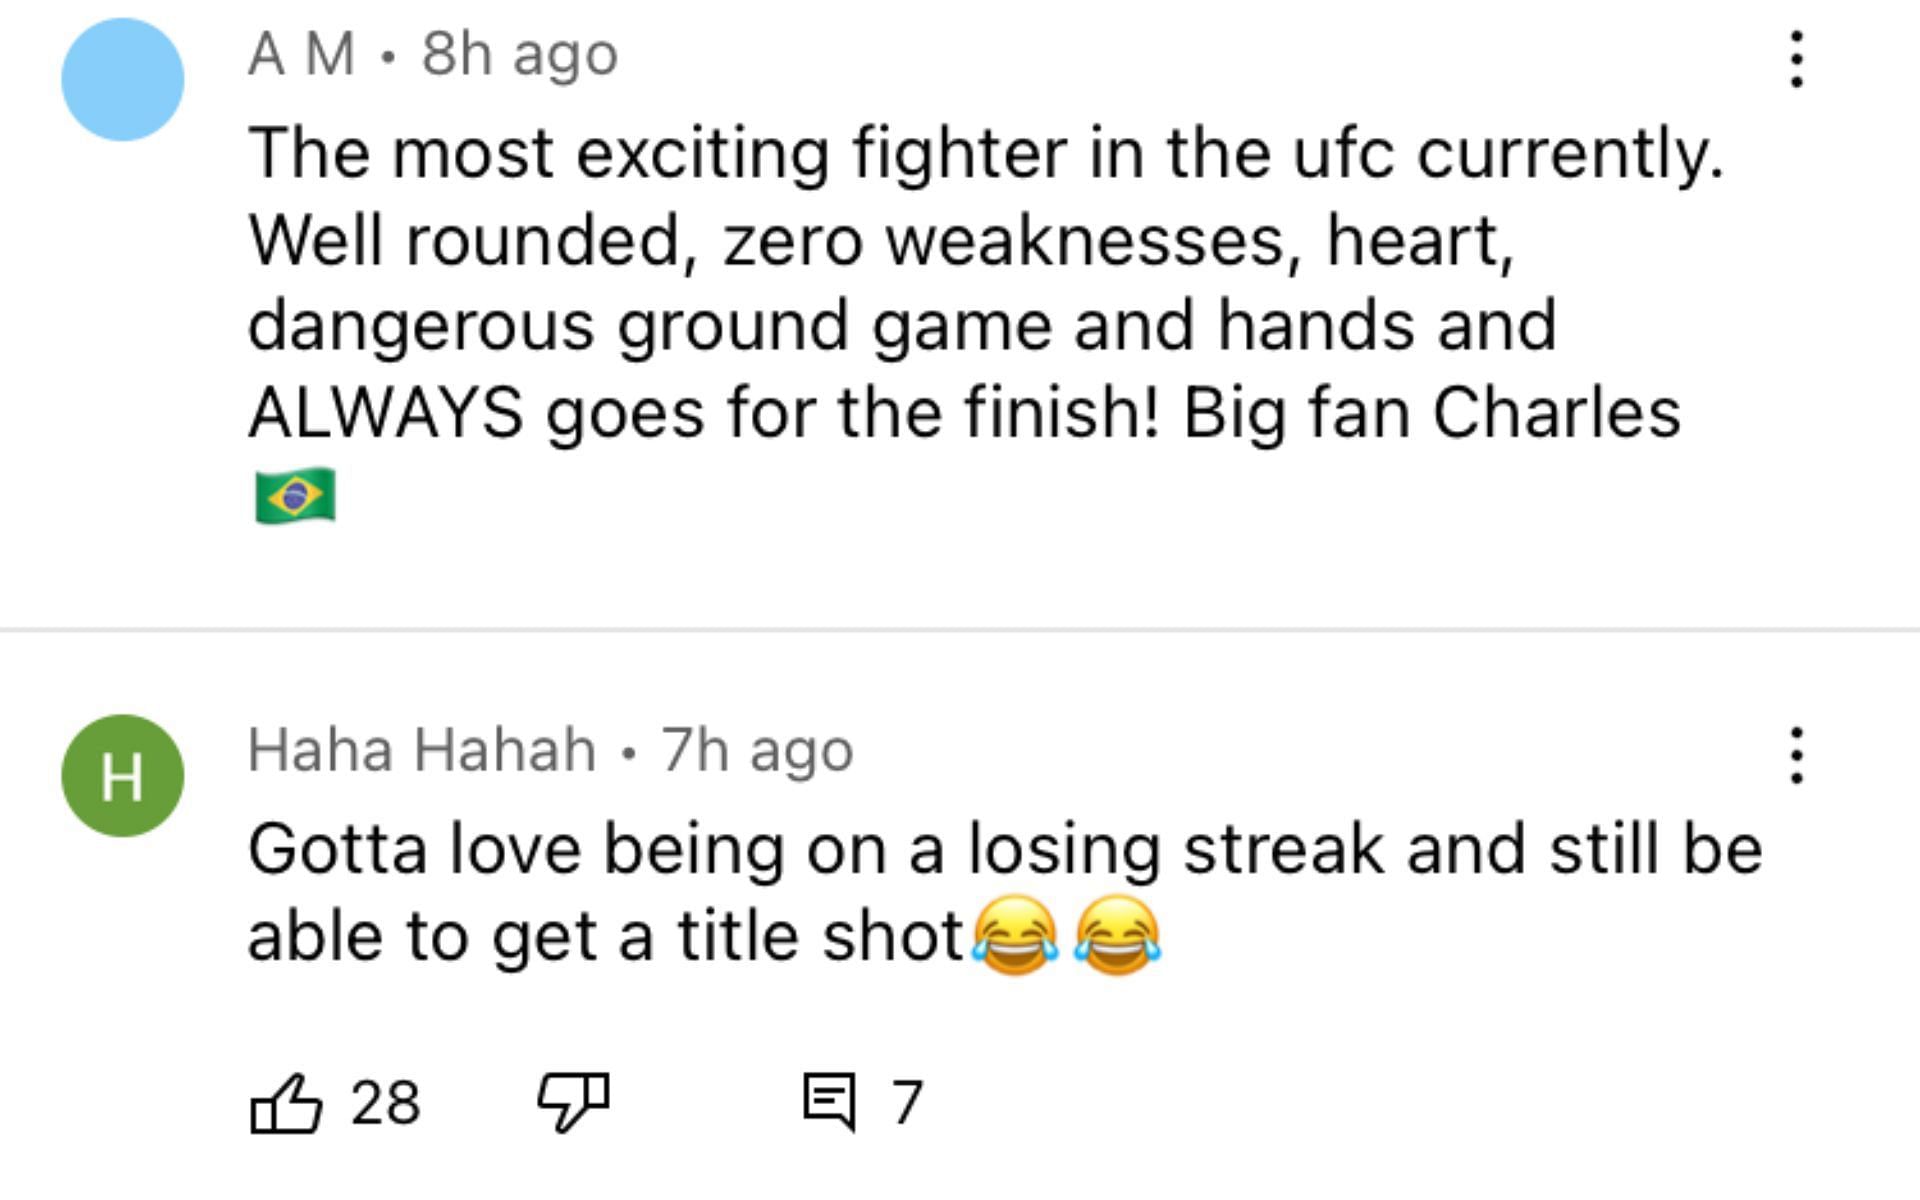 Mixed Fan reactions to a potential Oliveira-McGregor matchup 